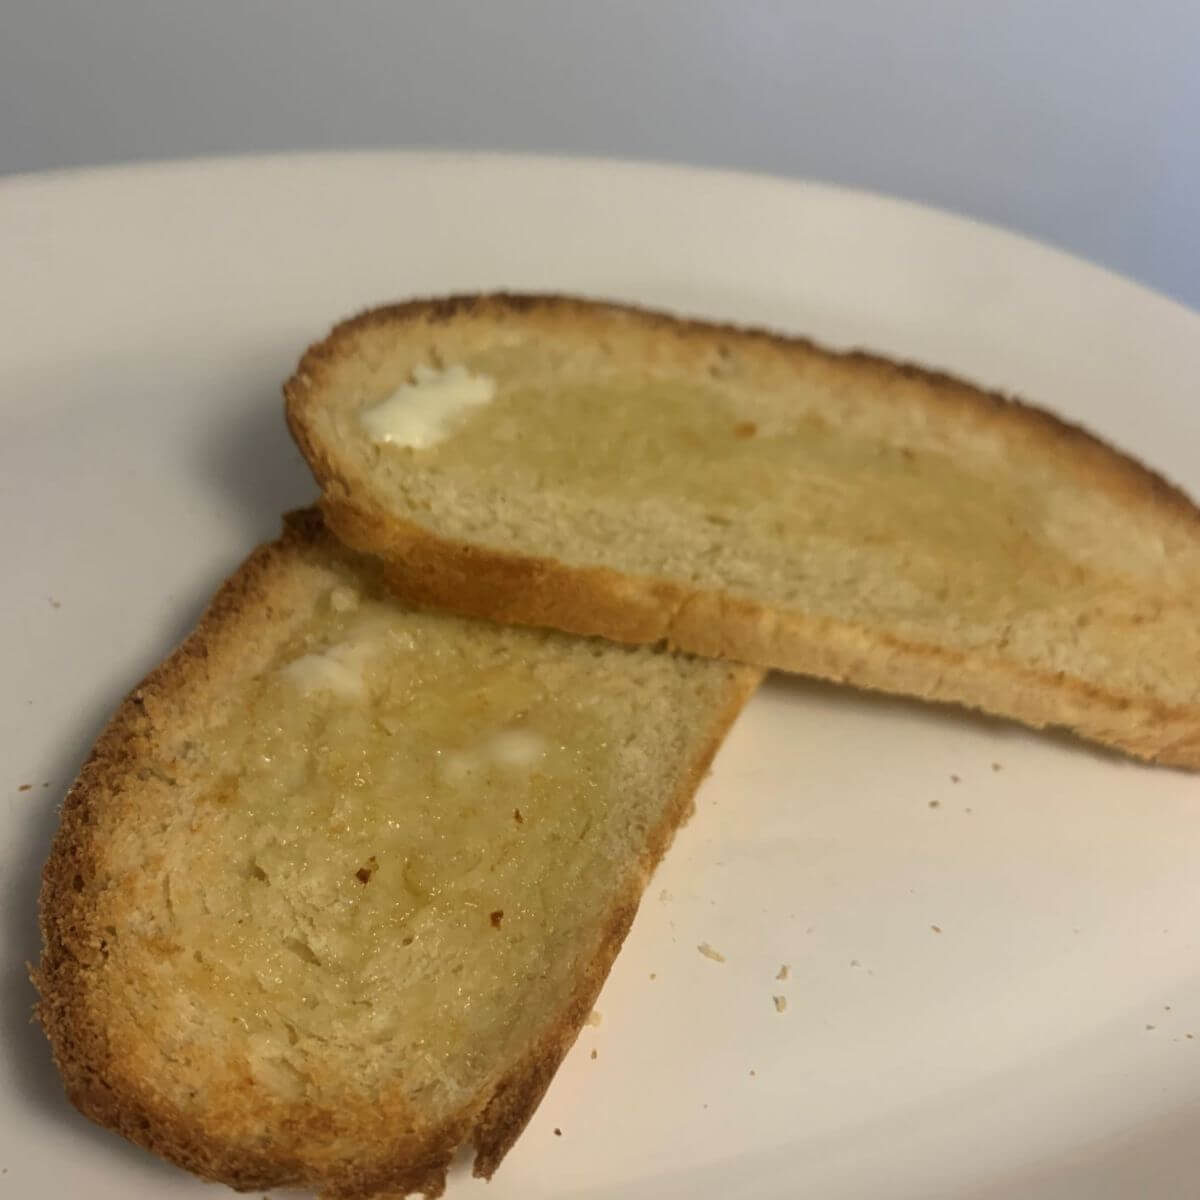 2 thin slices of bloomer bread made into toast with melted butter on top, on a white plate.